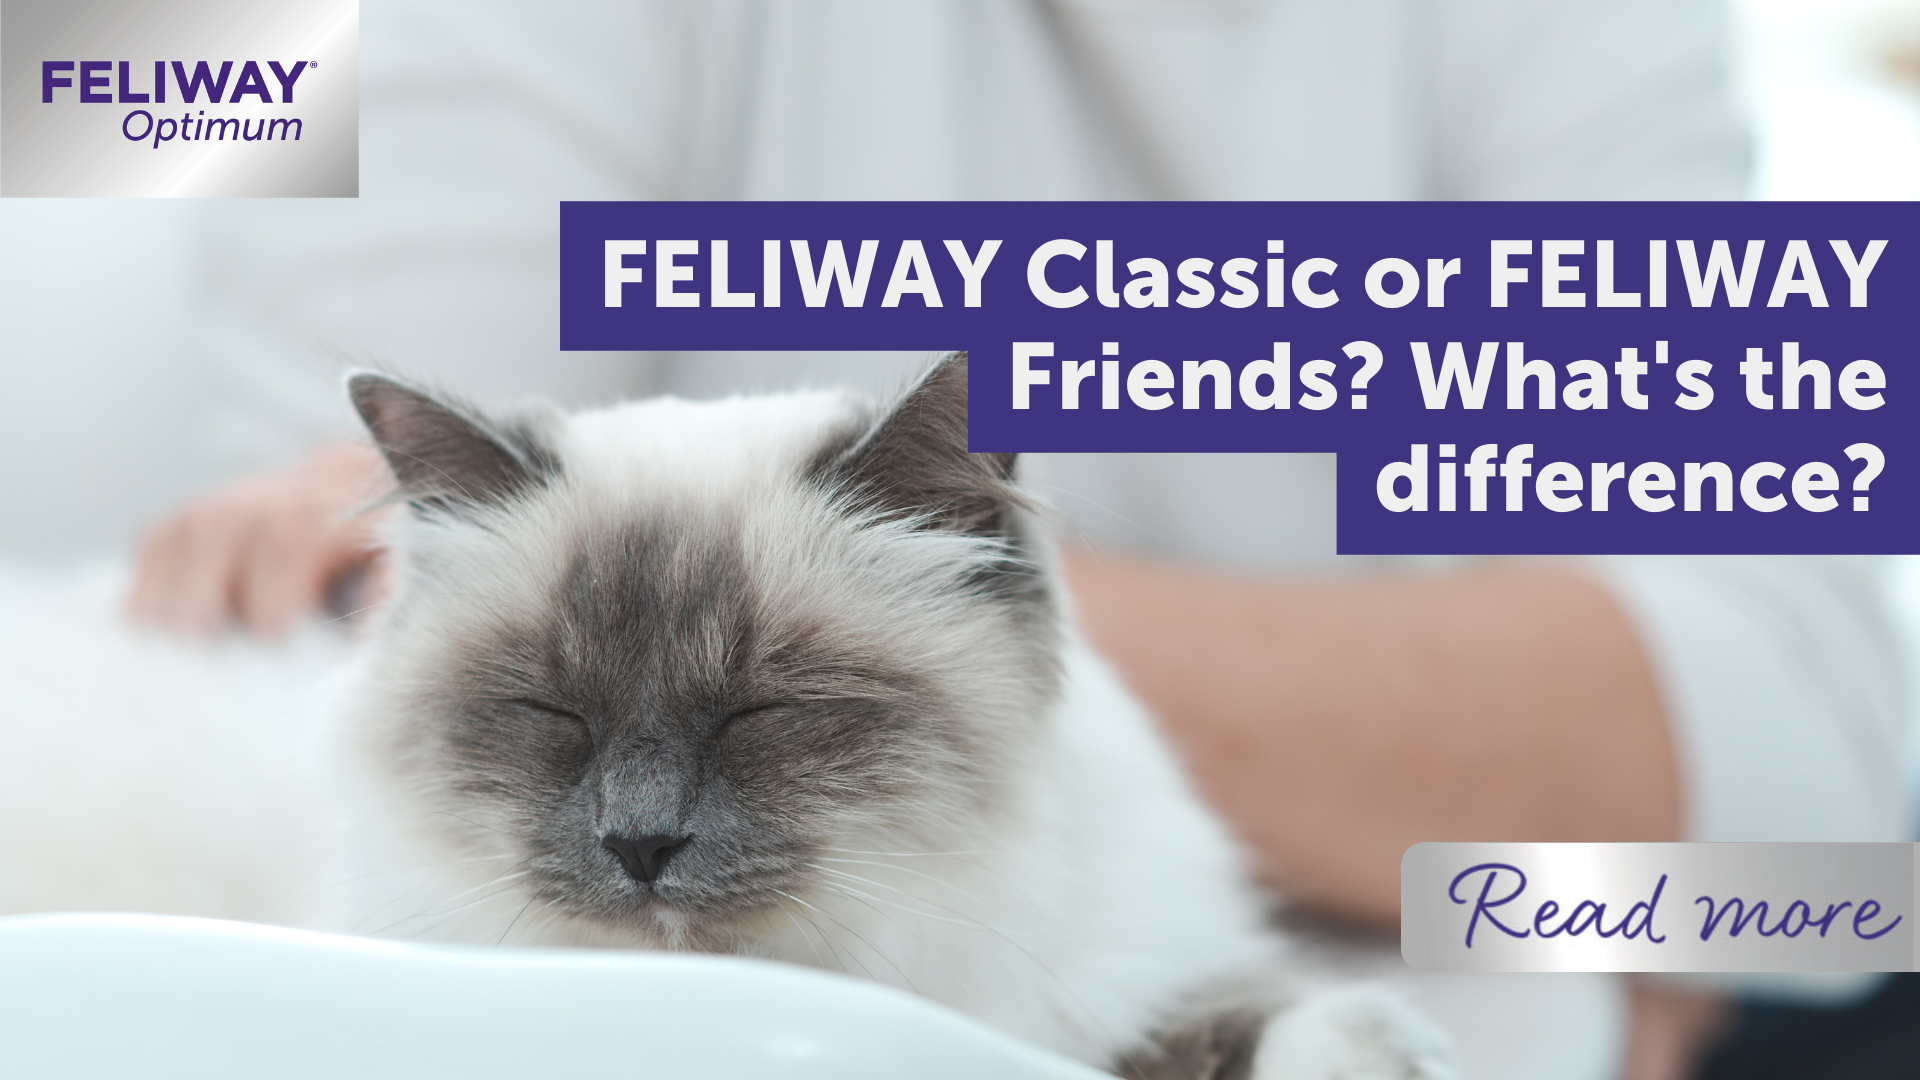 How FELIWAY CLASSIC helped Cassius the cat to cope with changes in